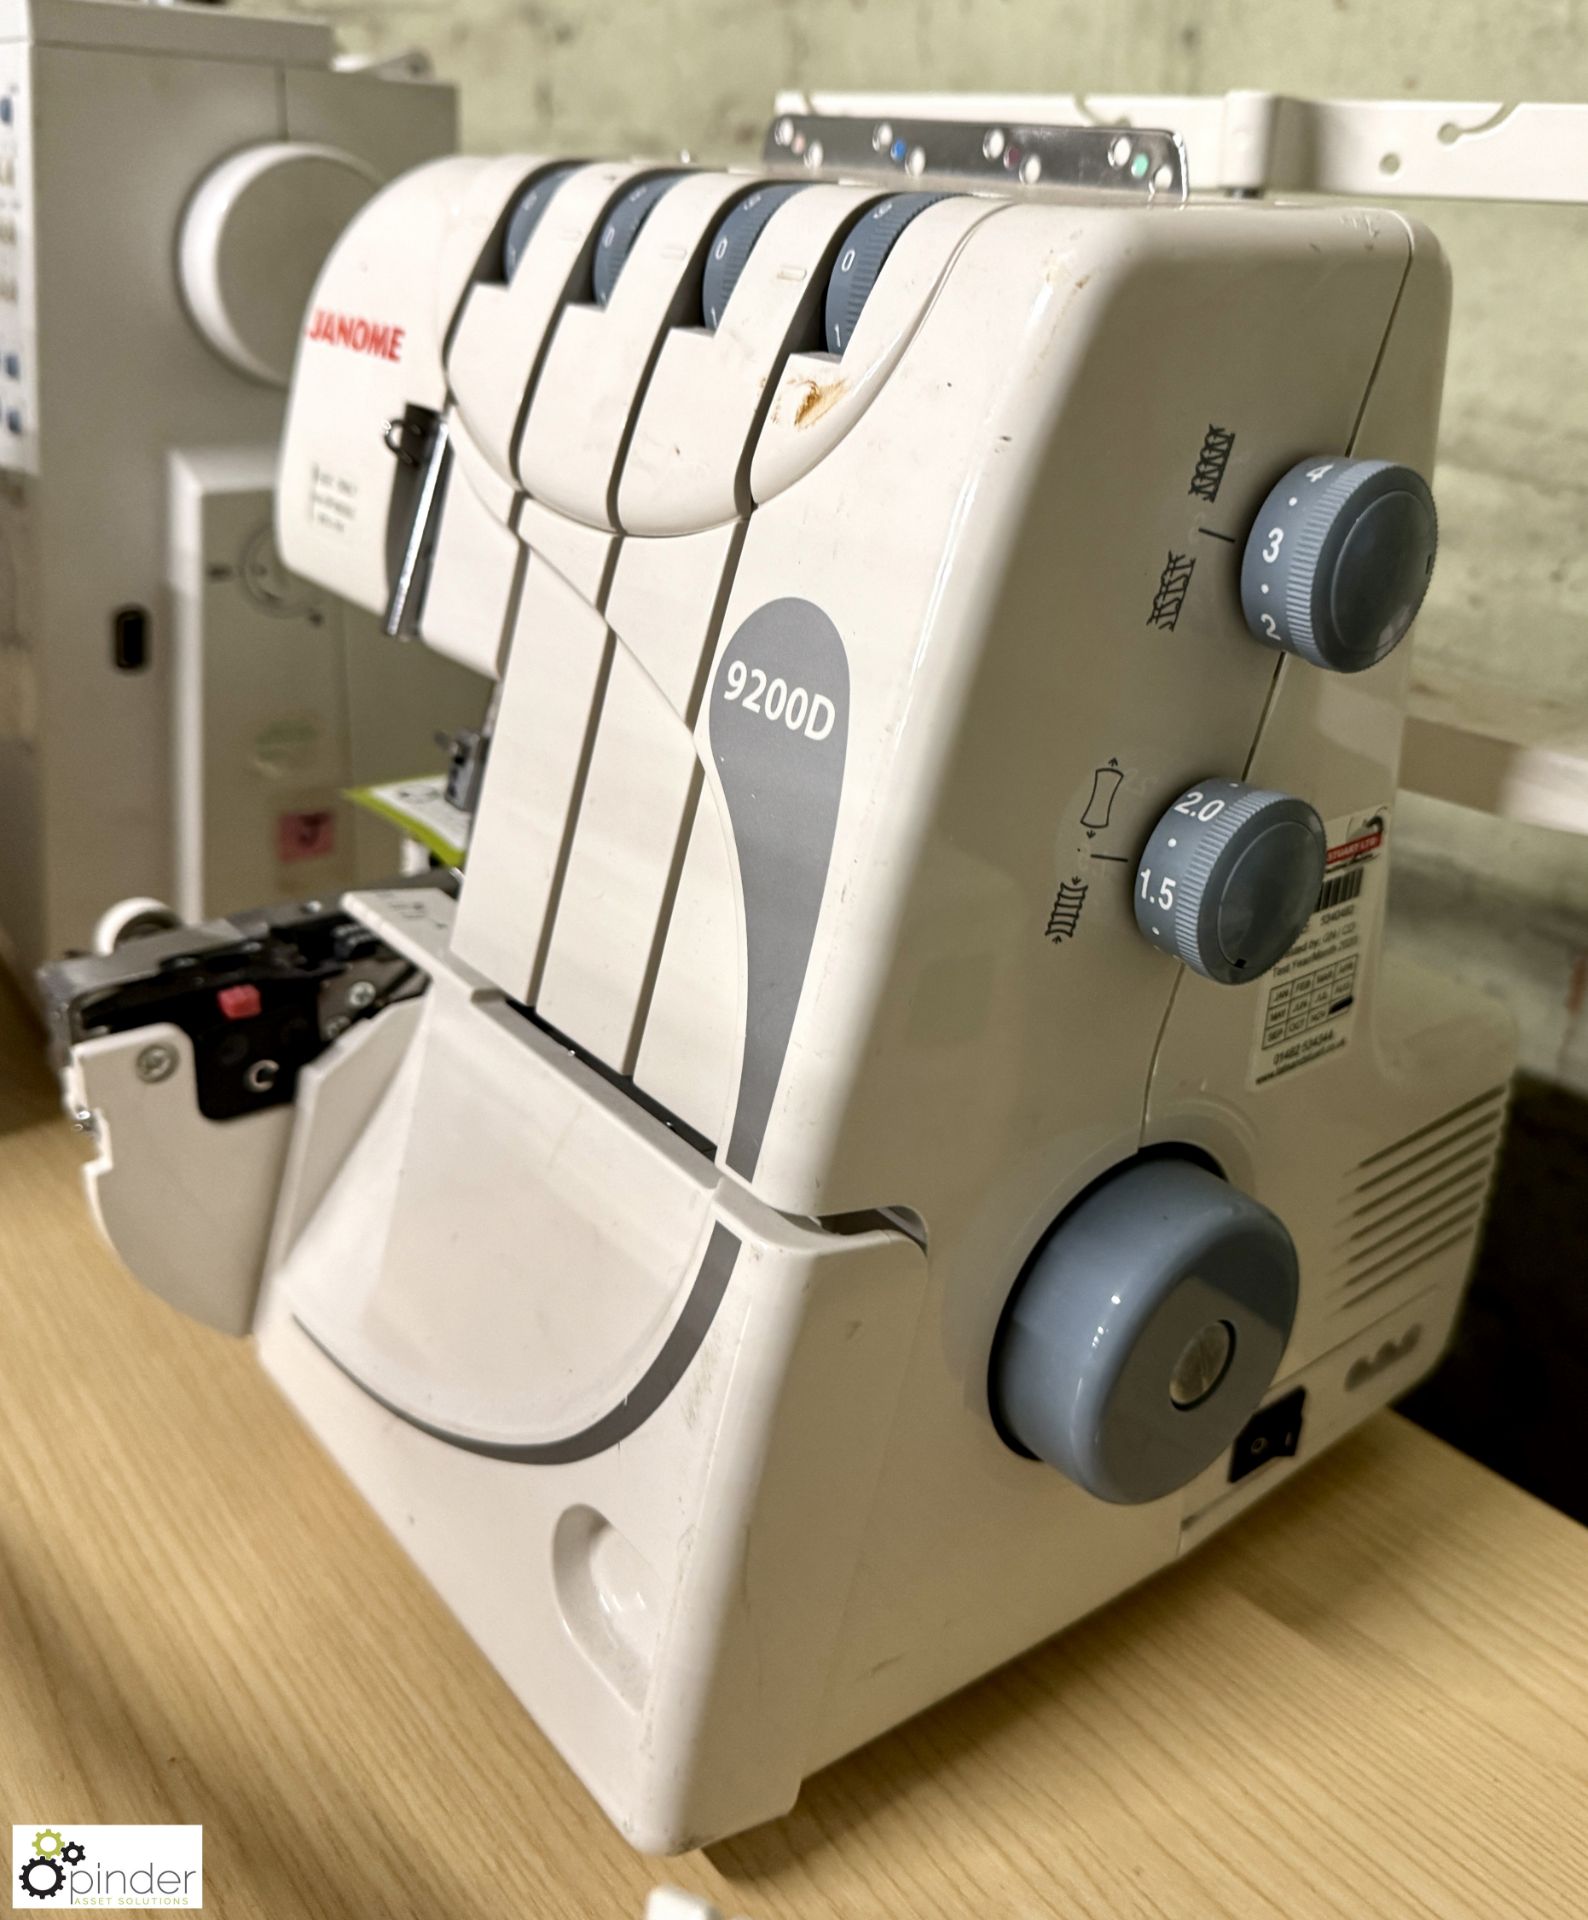 Janome 9200D Domestic 4-thread Overlocker, 240volts (no power leads or foot controls) - Image 2 of 3